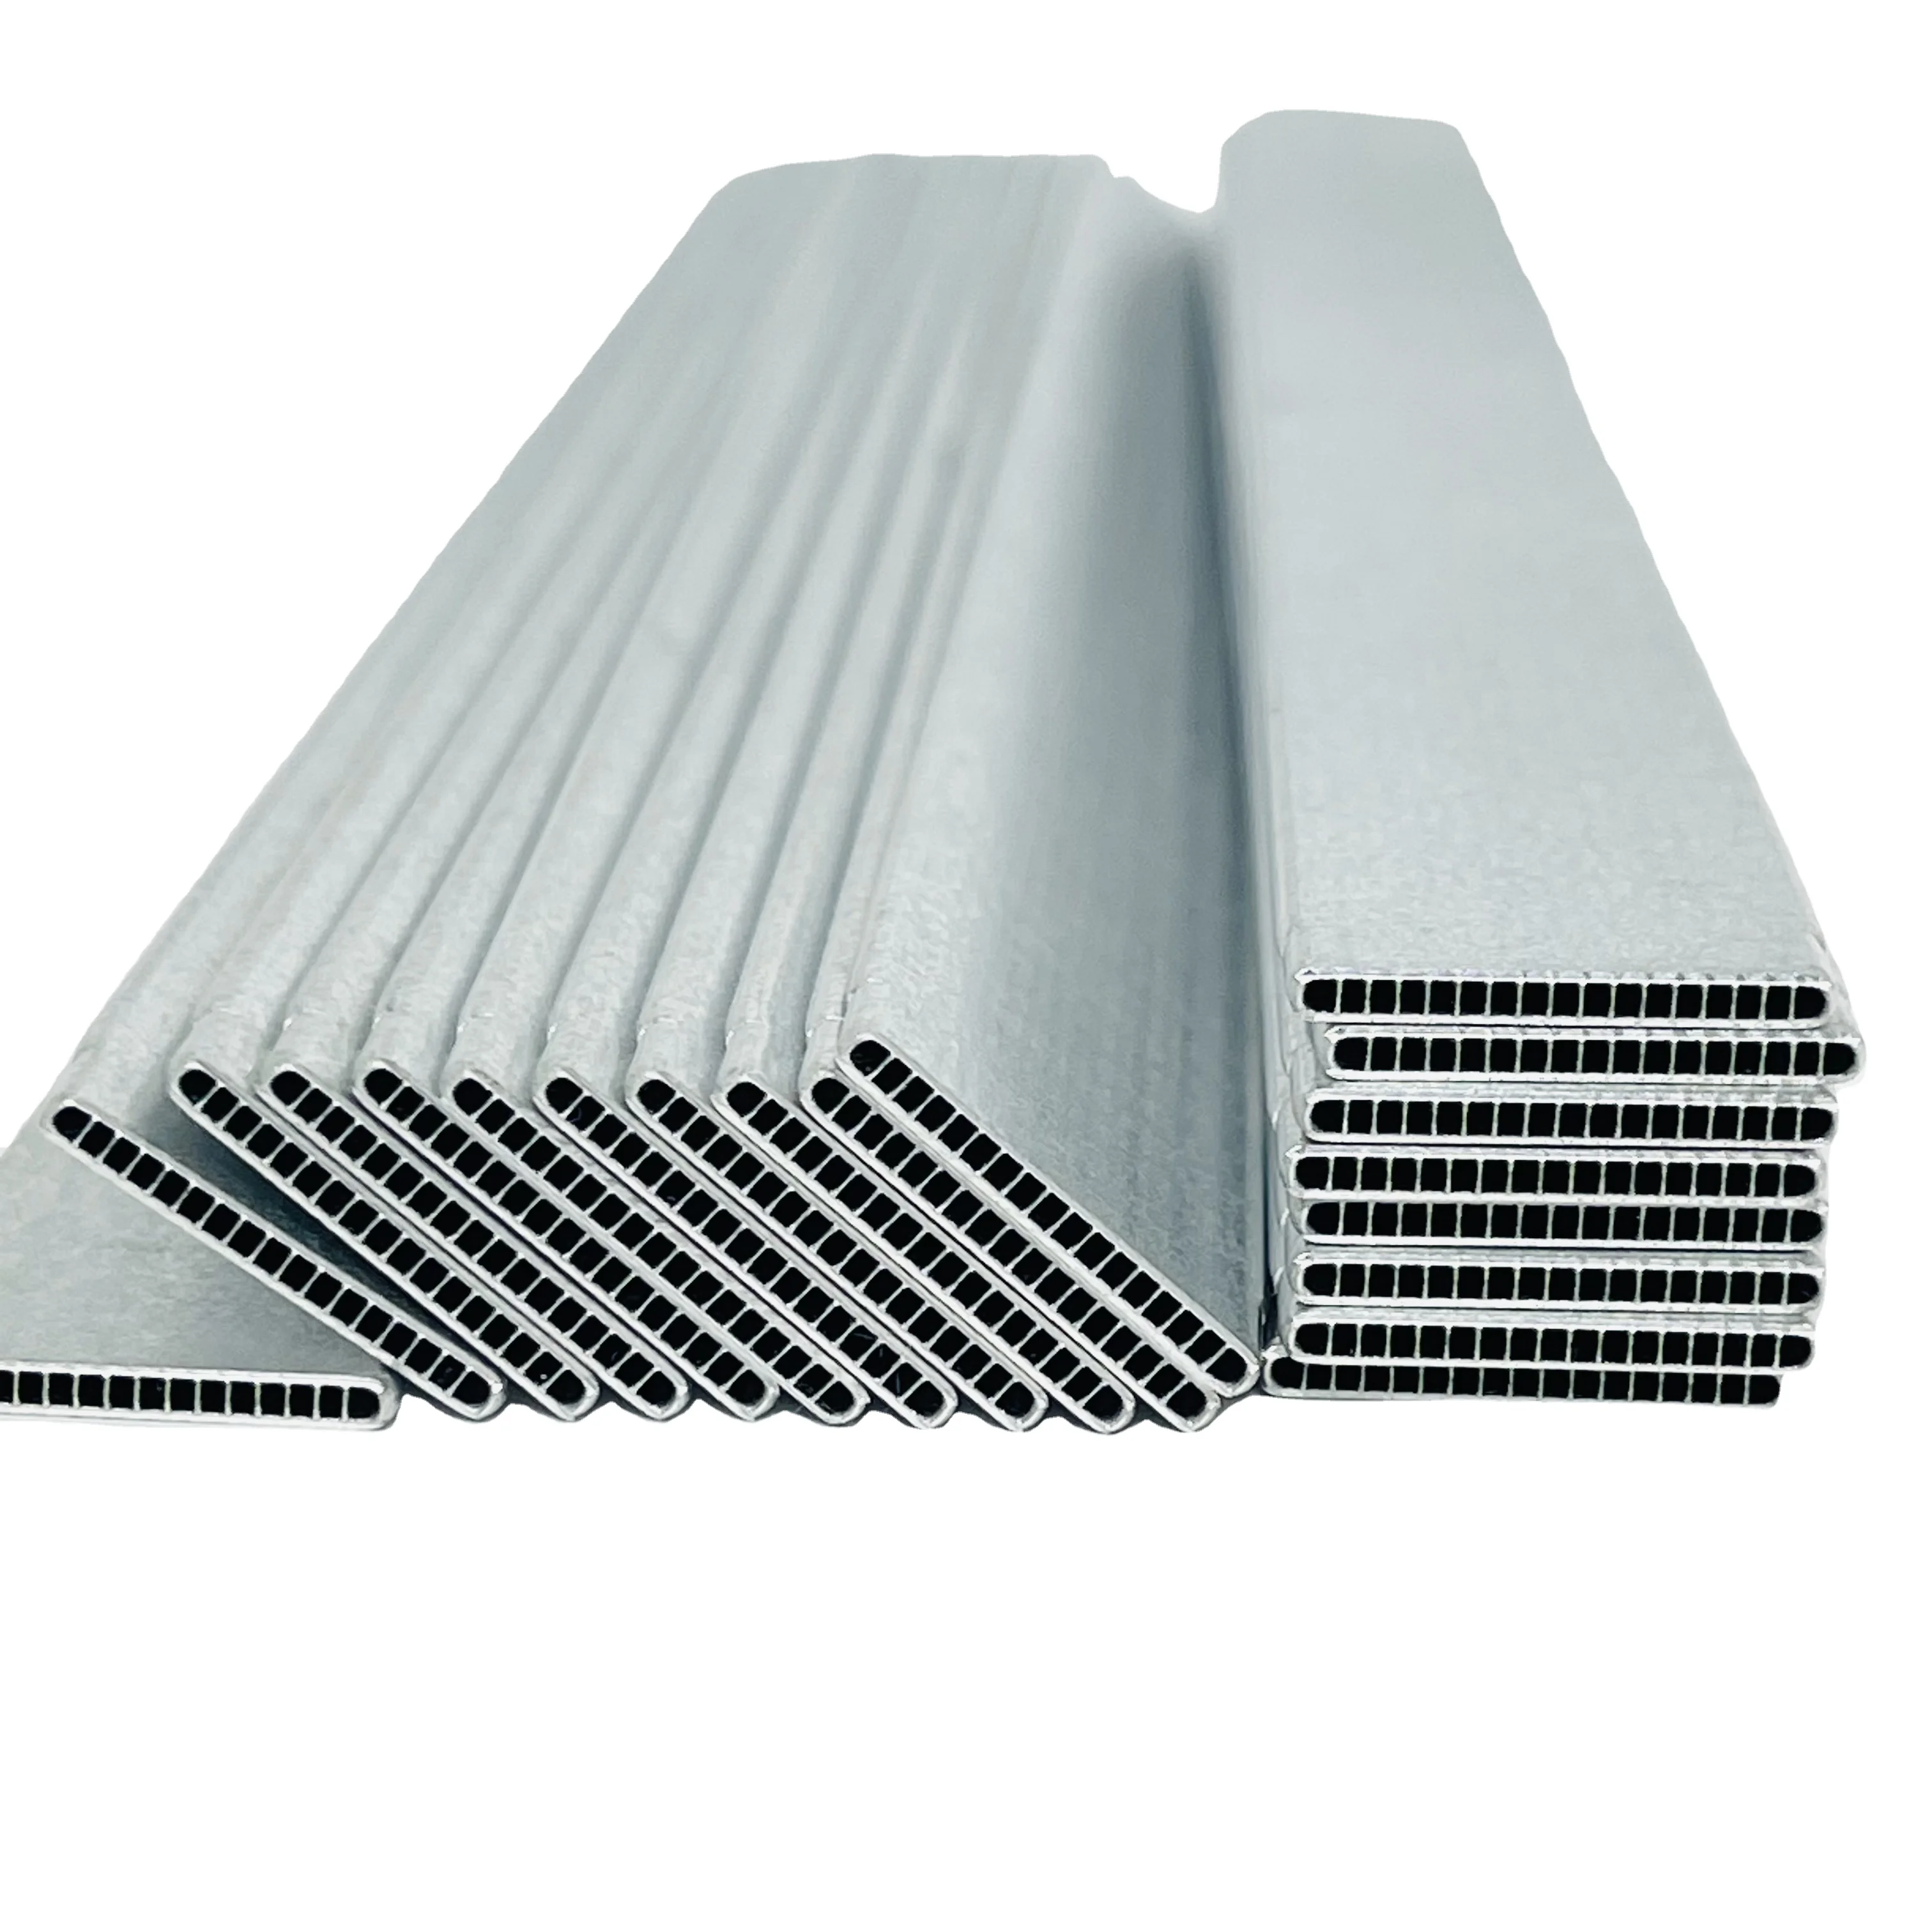 Aluminum Extruded Microchannel Flat Tubes for Aluminum Heat Exchangers (1600509865053)